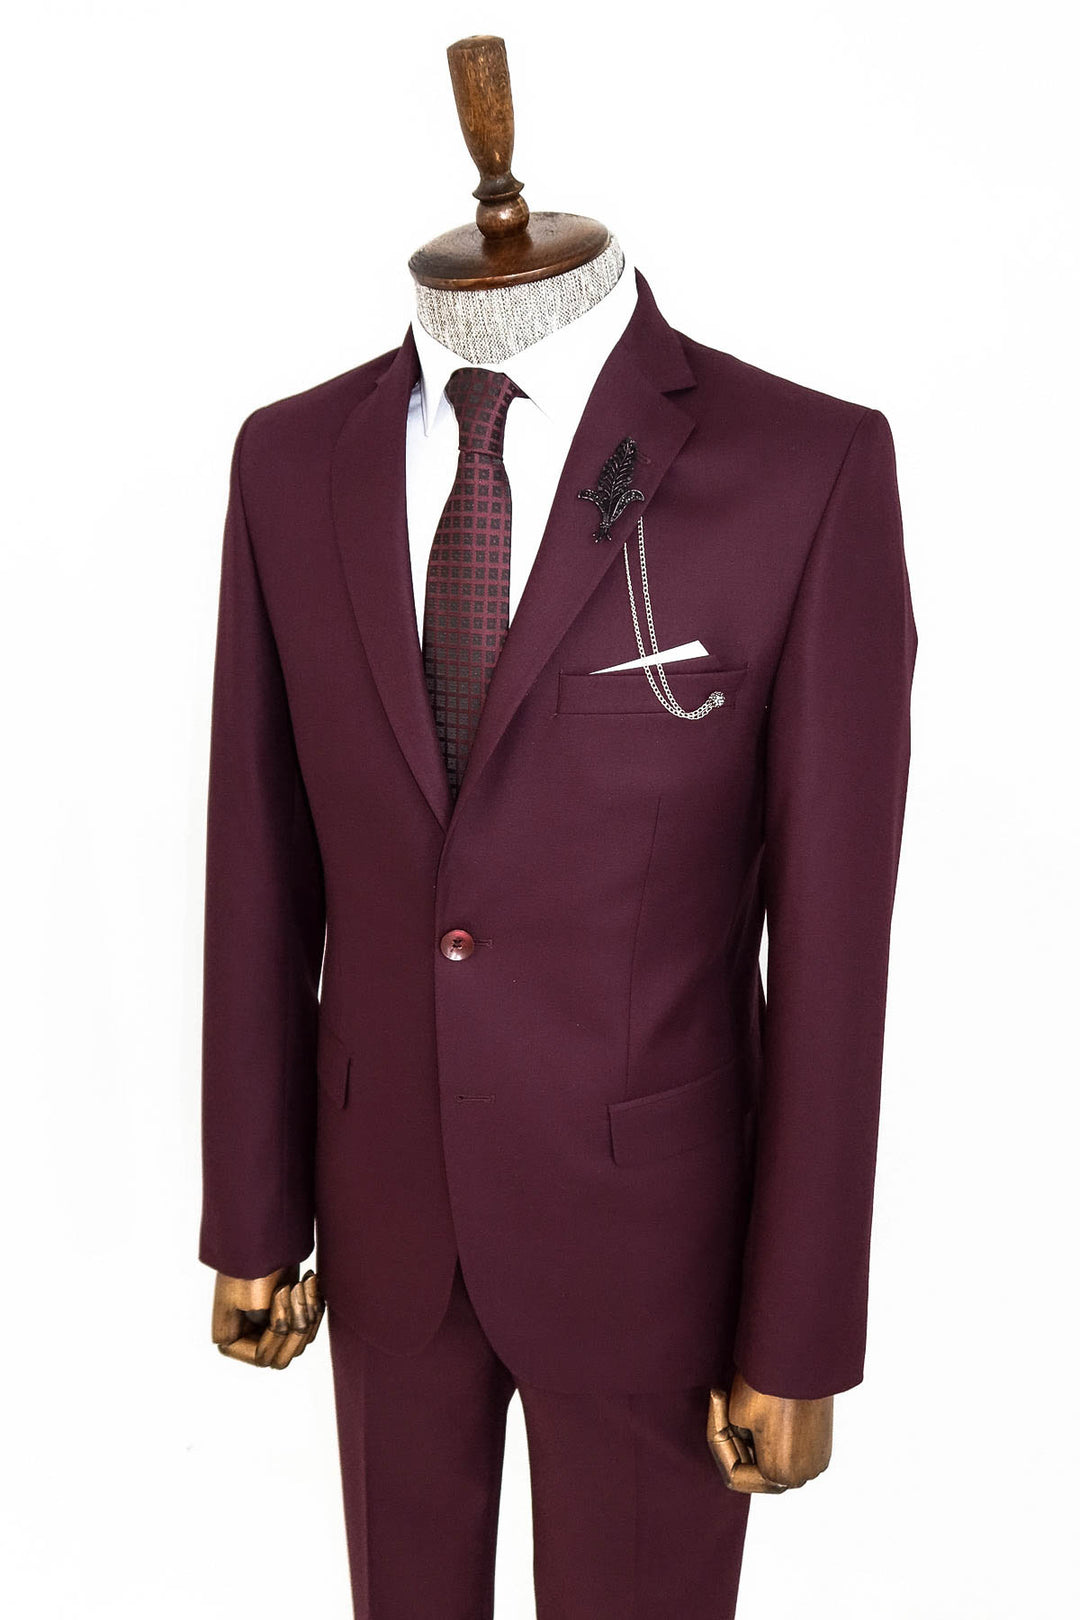 Two Buttons Two Piece Burgundy Men Suit - Wessi